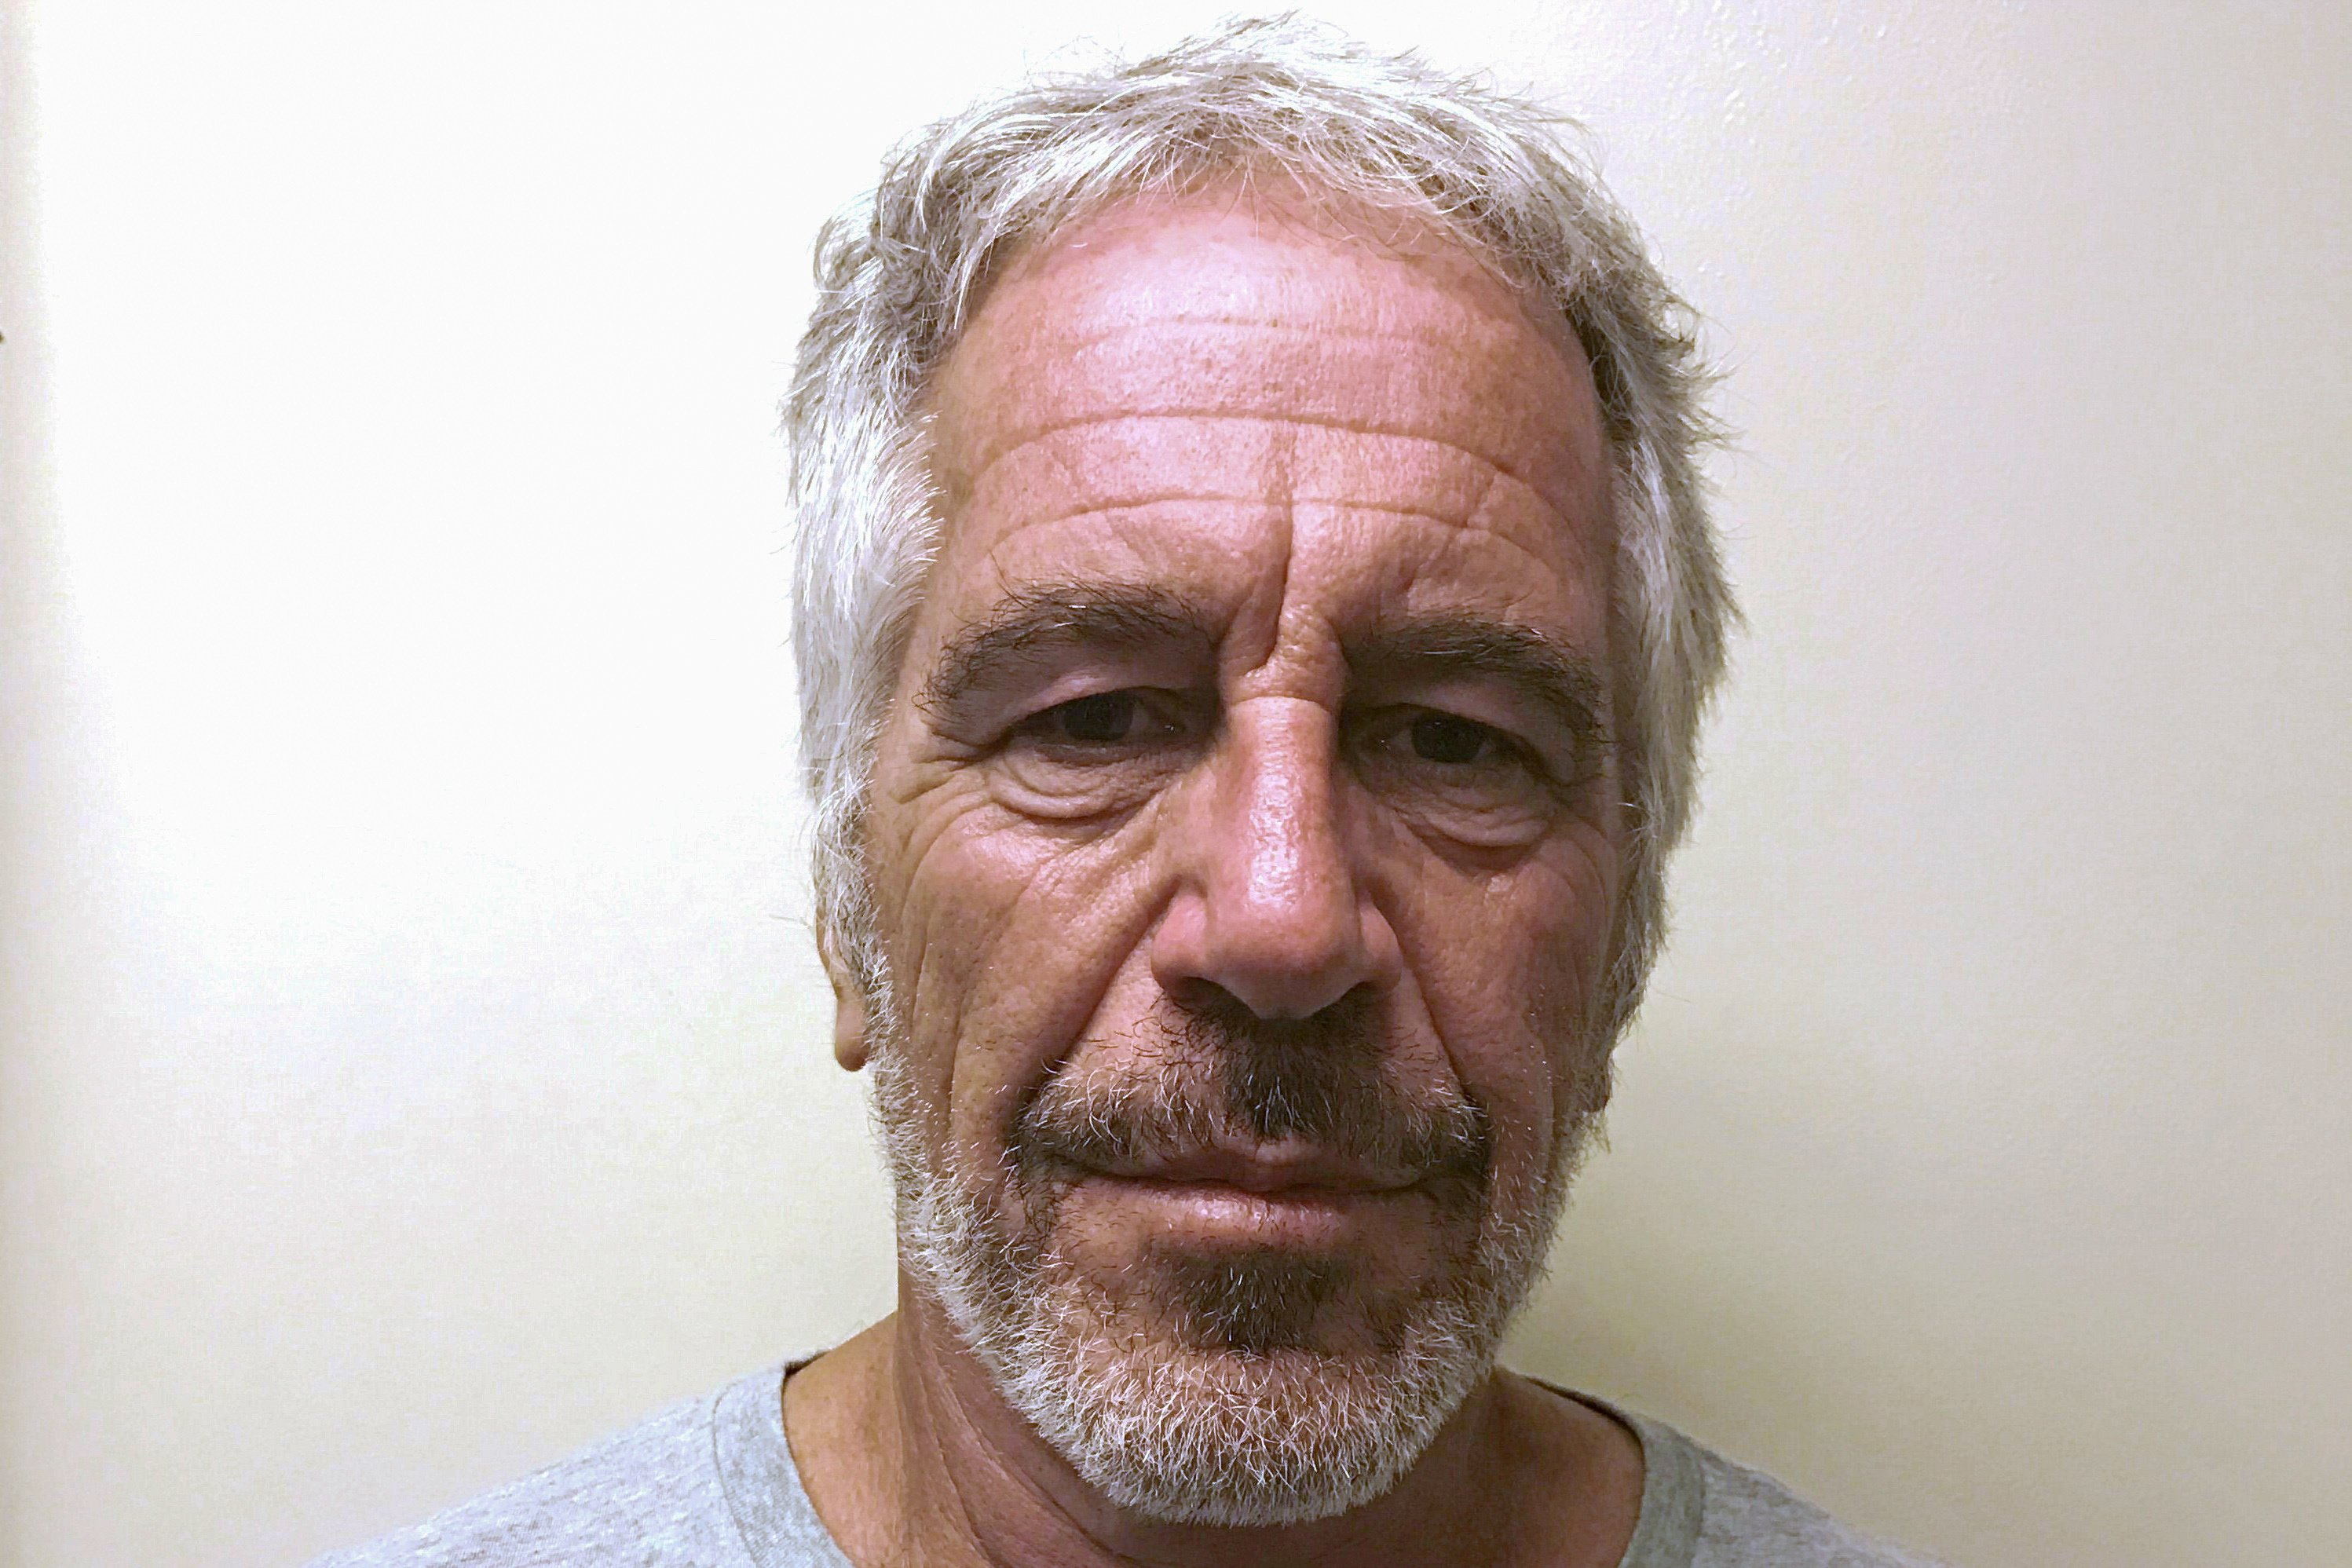 U.S. financier Jeffrey Epstein appears in a photograph taken for the New York State Division of Criminal Justice Services' sex offender registry March 28, 2017 and obtained by Reuters July 10, 2019. (New York State Division of Criminal Justice Services/Handout/File Photo/REUTERS)